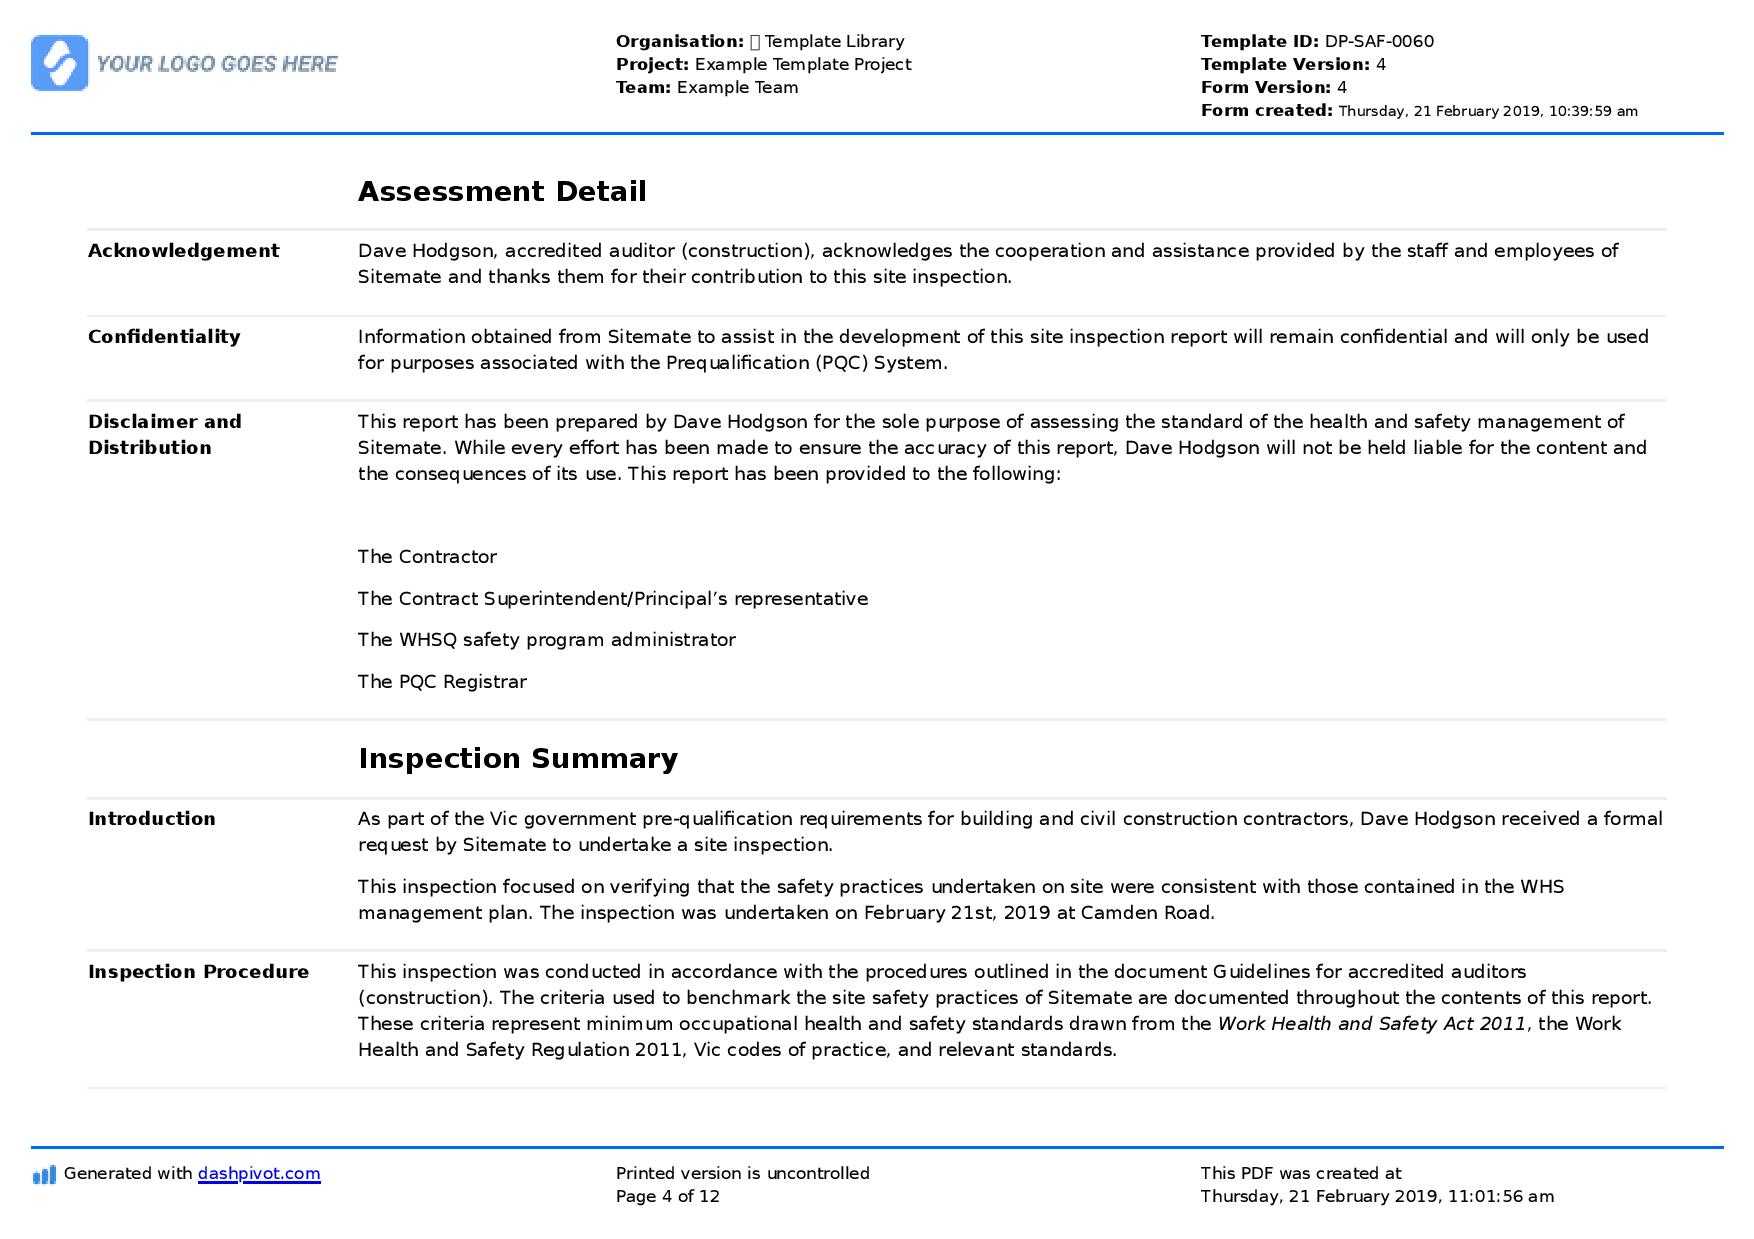 Site Inspection Report: Free Template, Sample And A Proven Regarding Template For Information Report